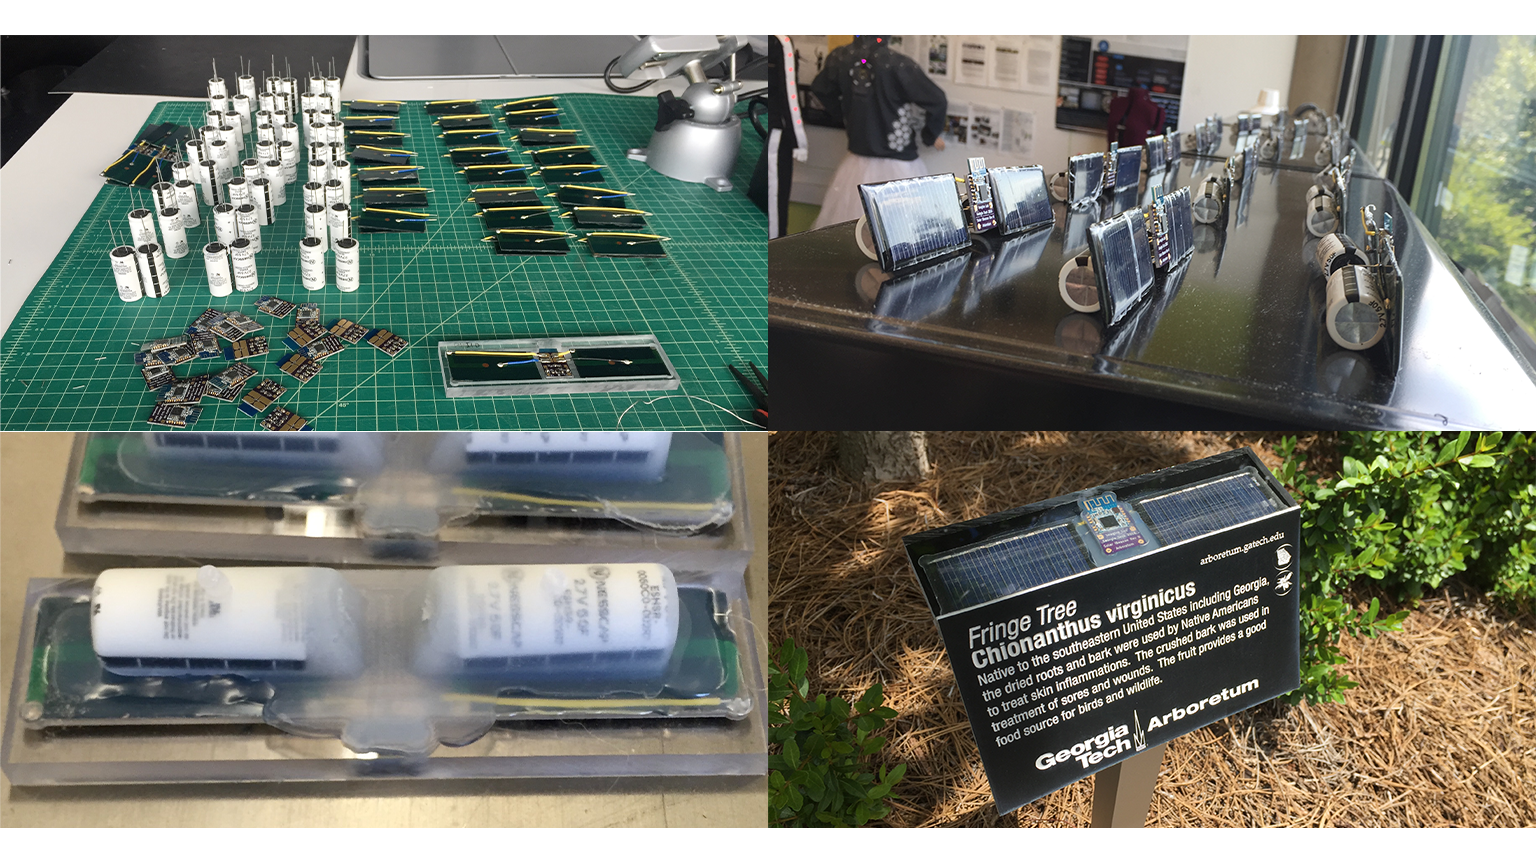 4 images of the fabrication of the ibeacons 